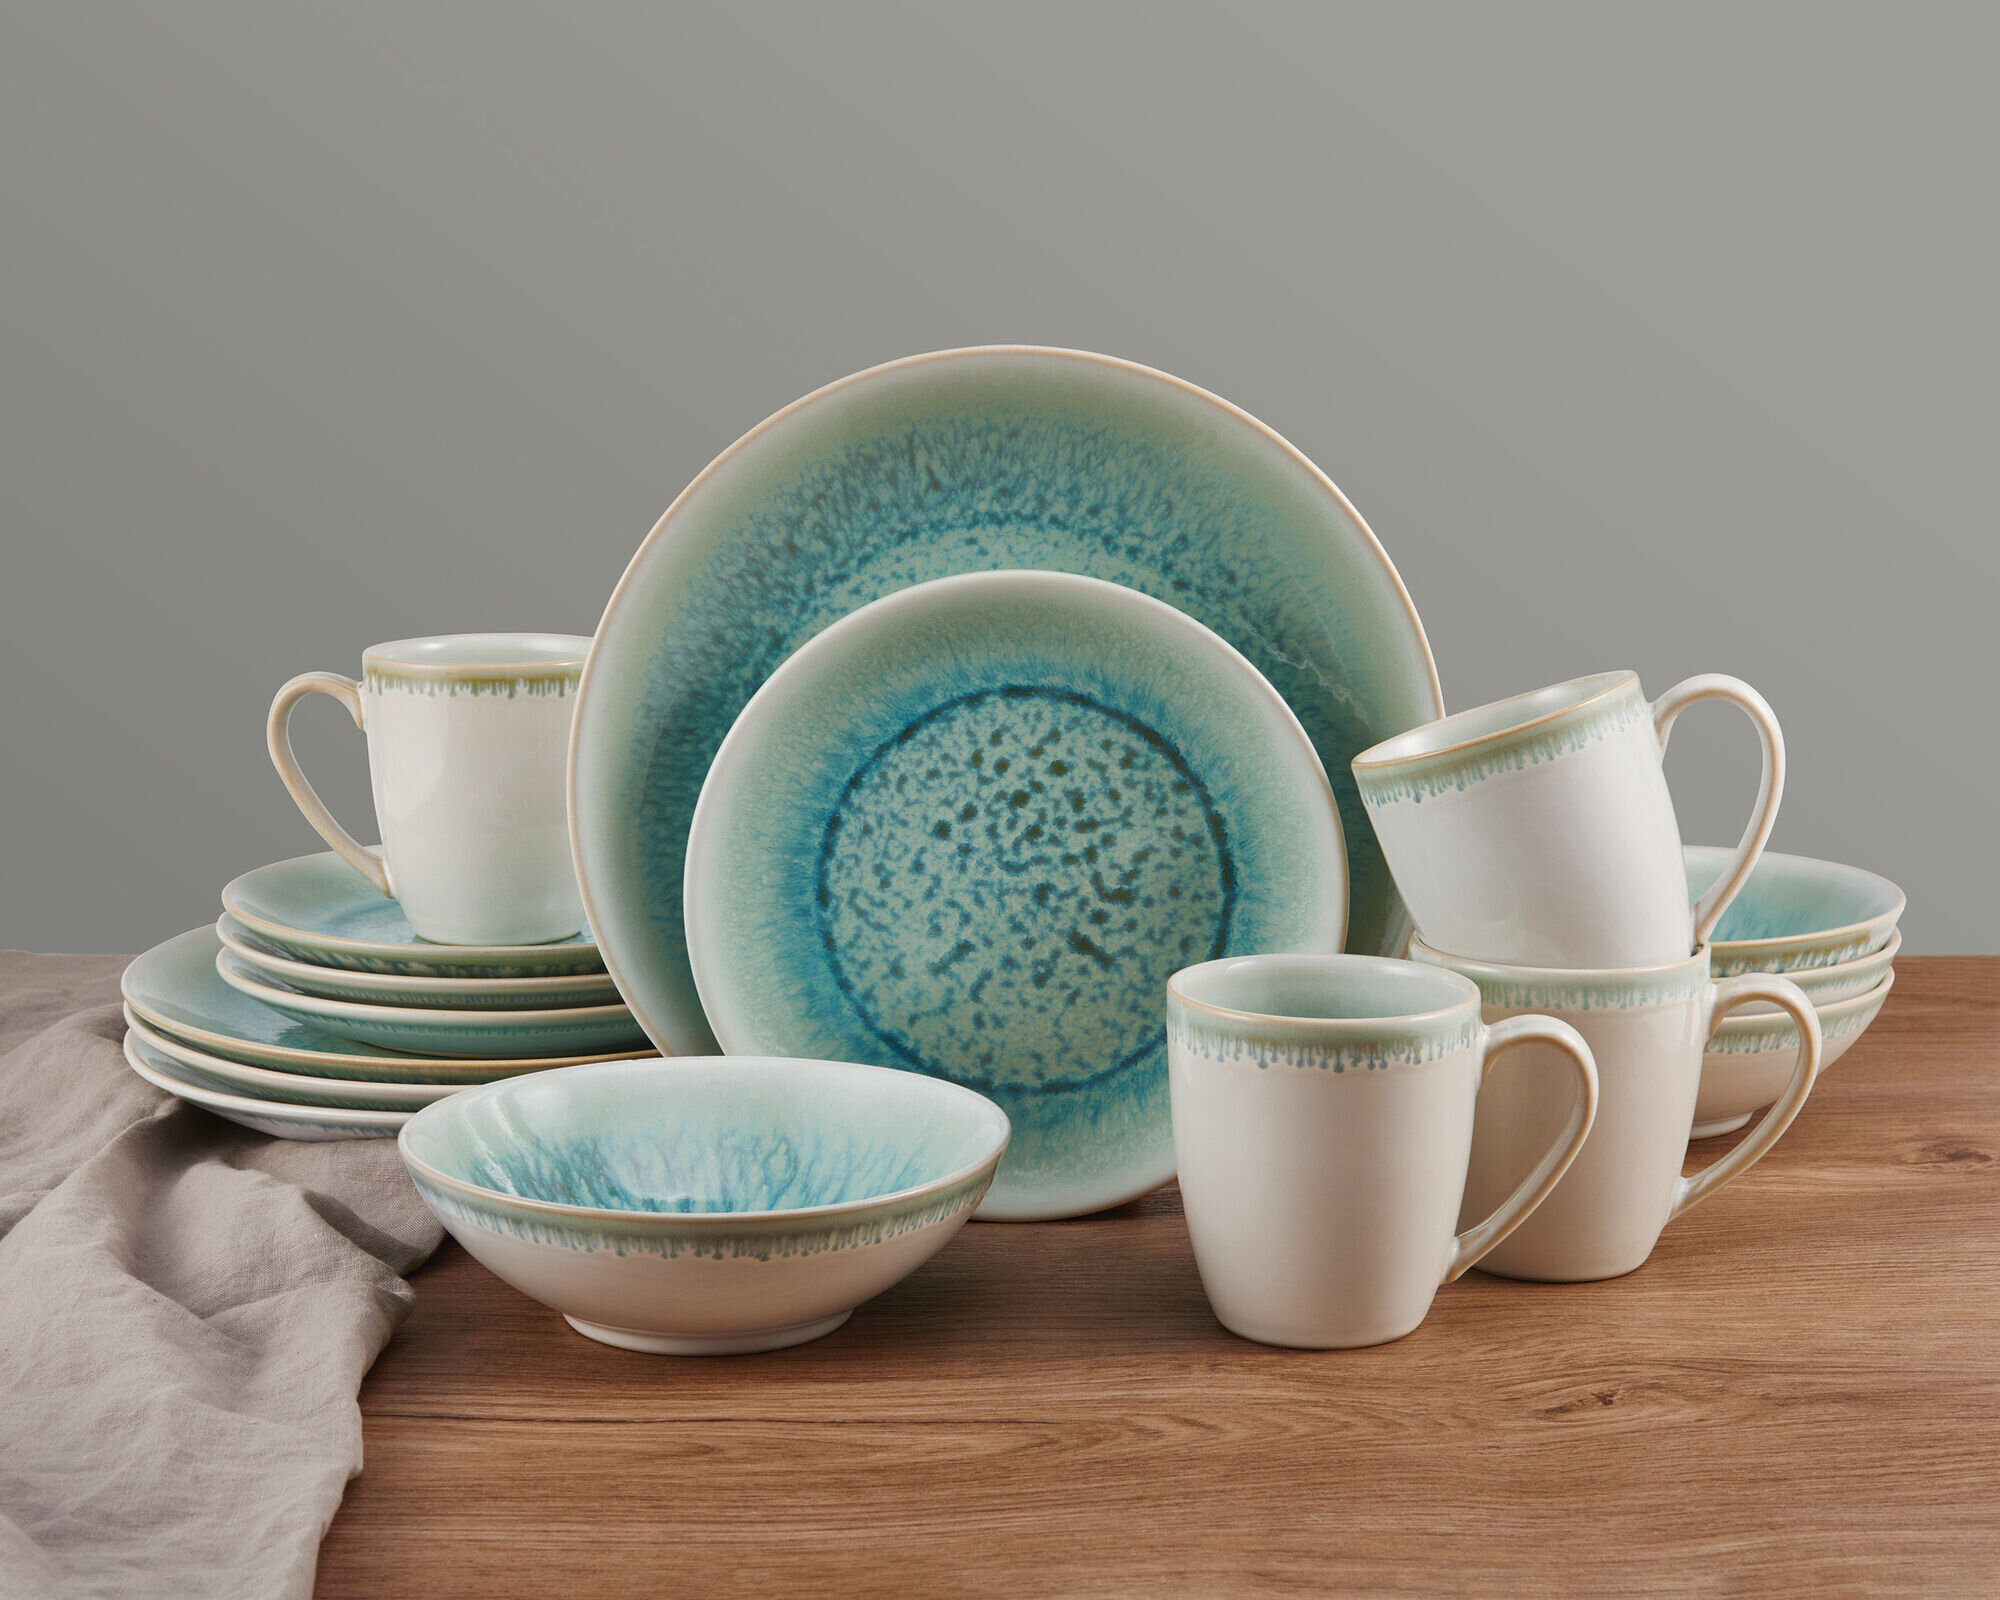 Kitchen Dining Set 16-Piece Dinnerware Plates Bowls Dishes Cup Round Turquoise 